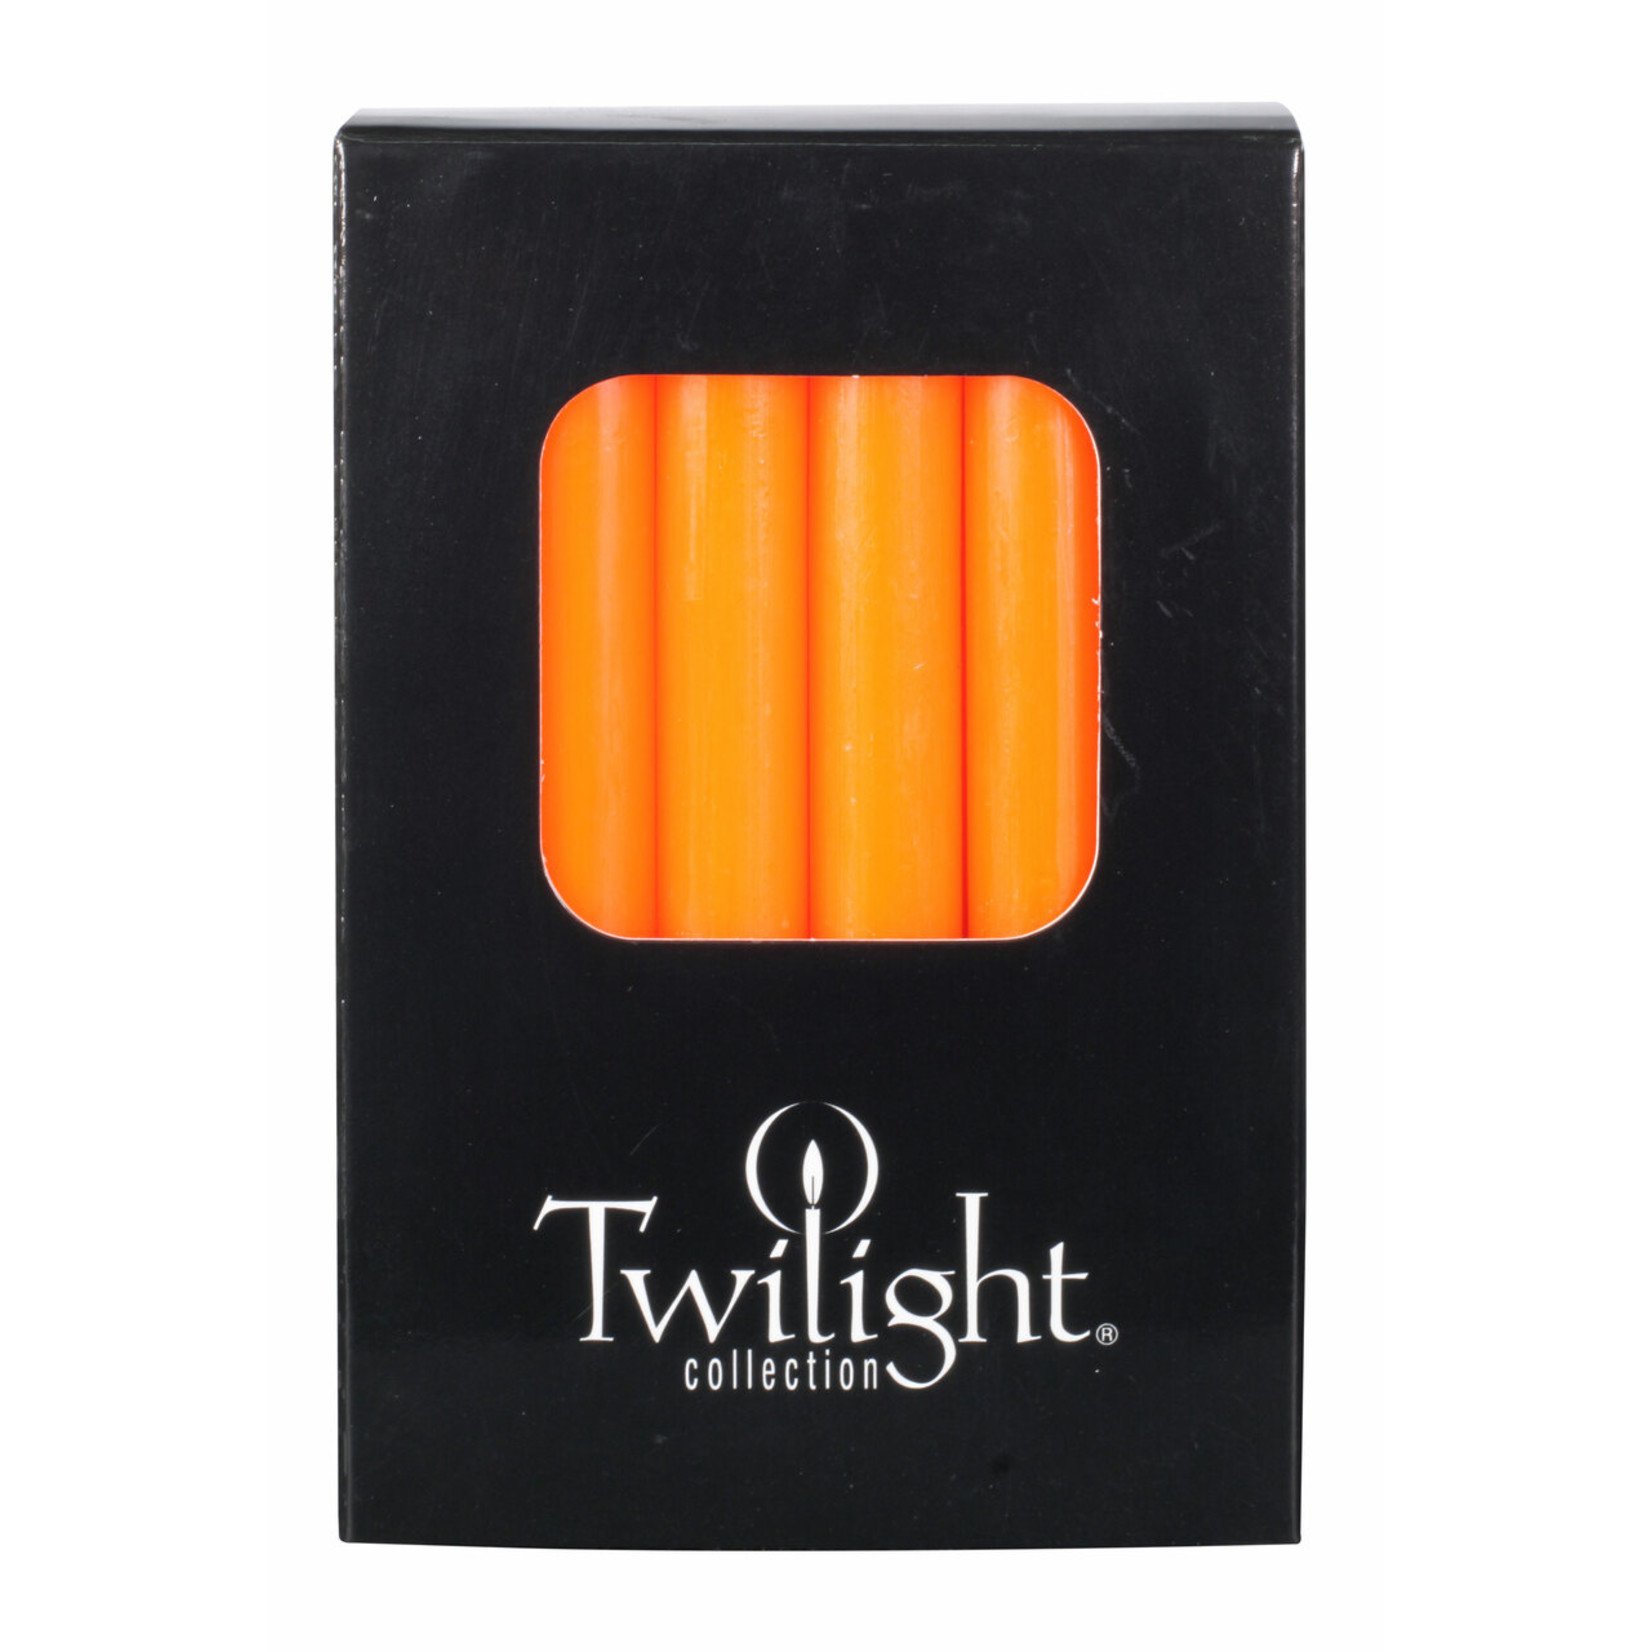 Twilight Collection Orange Mini Candles - 12 pack